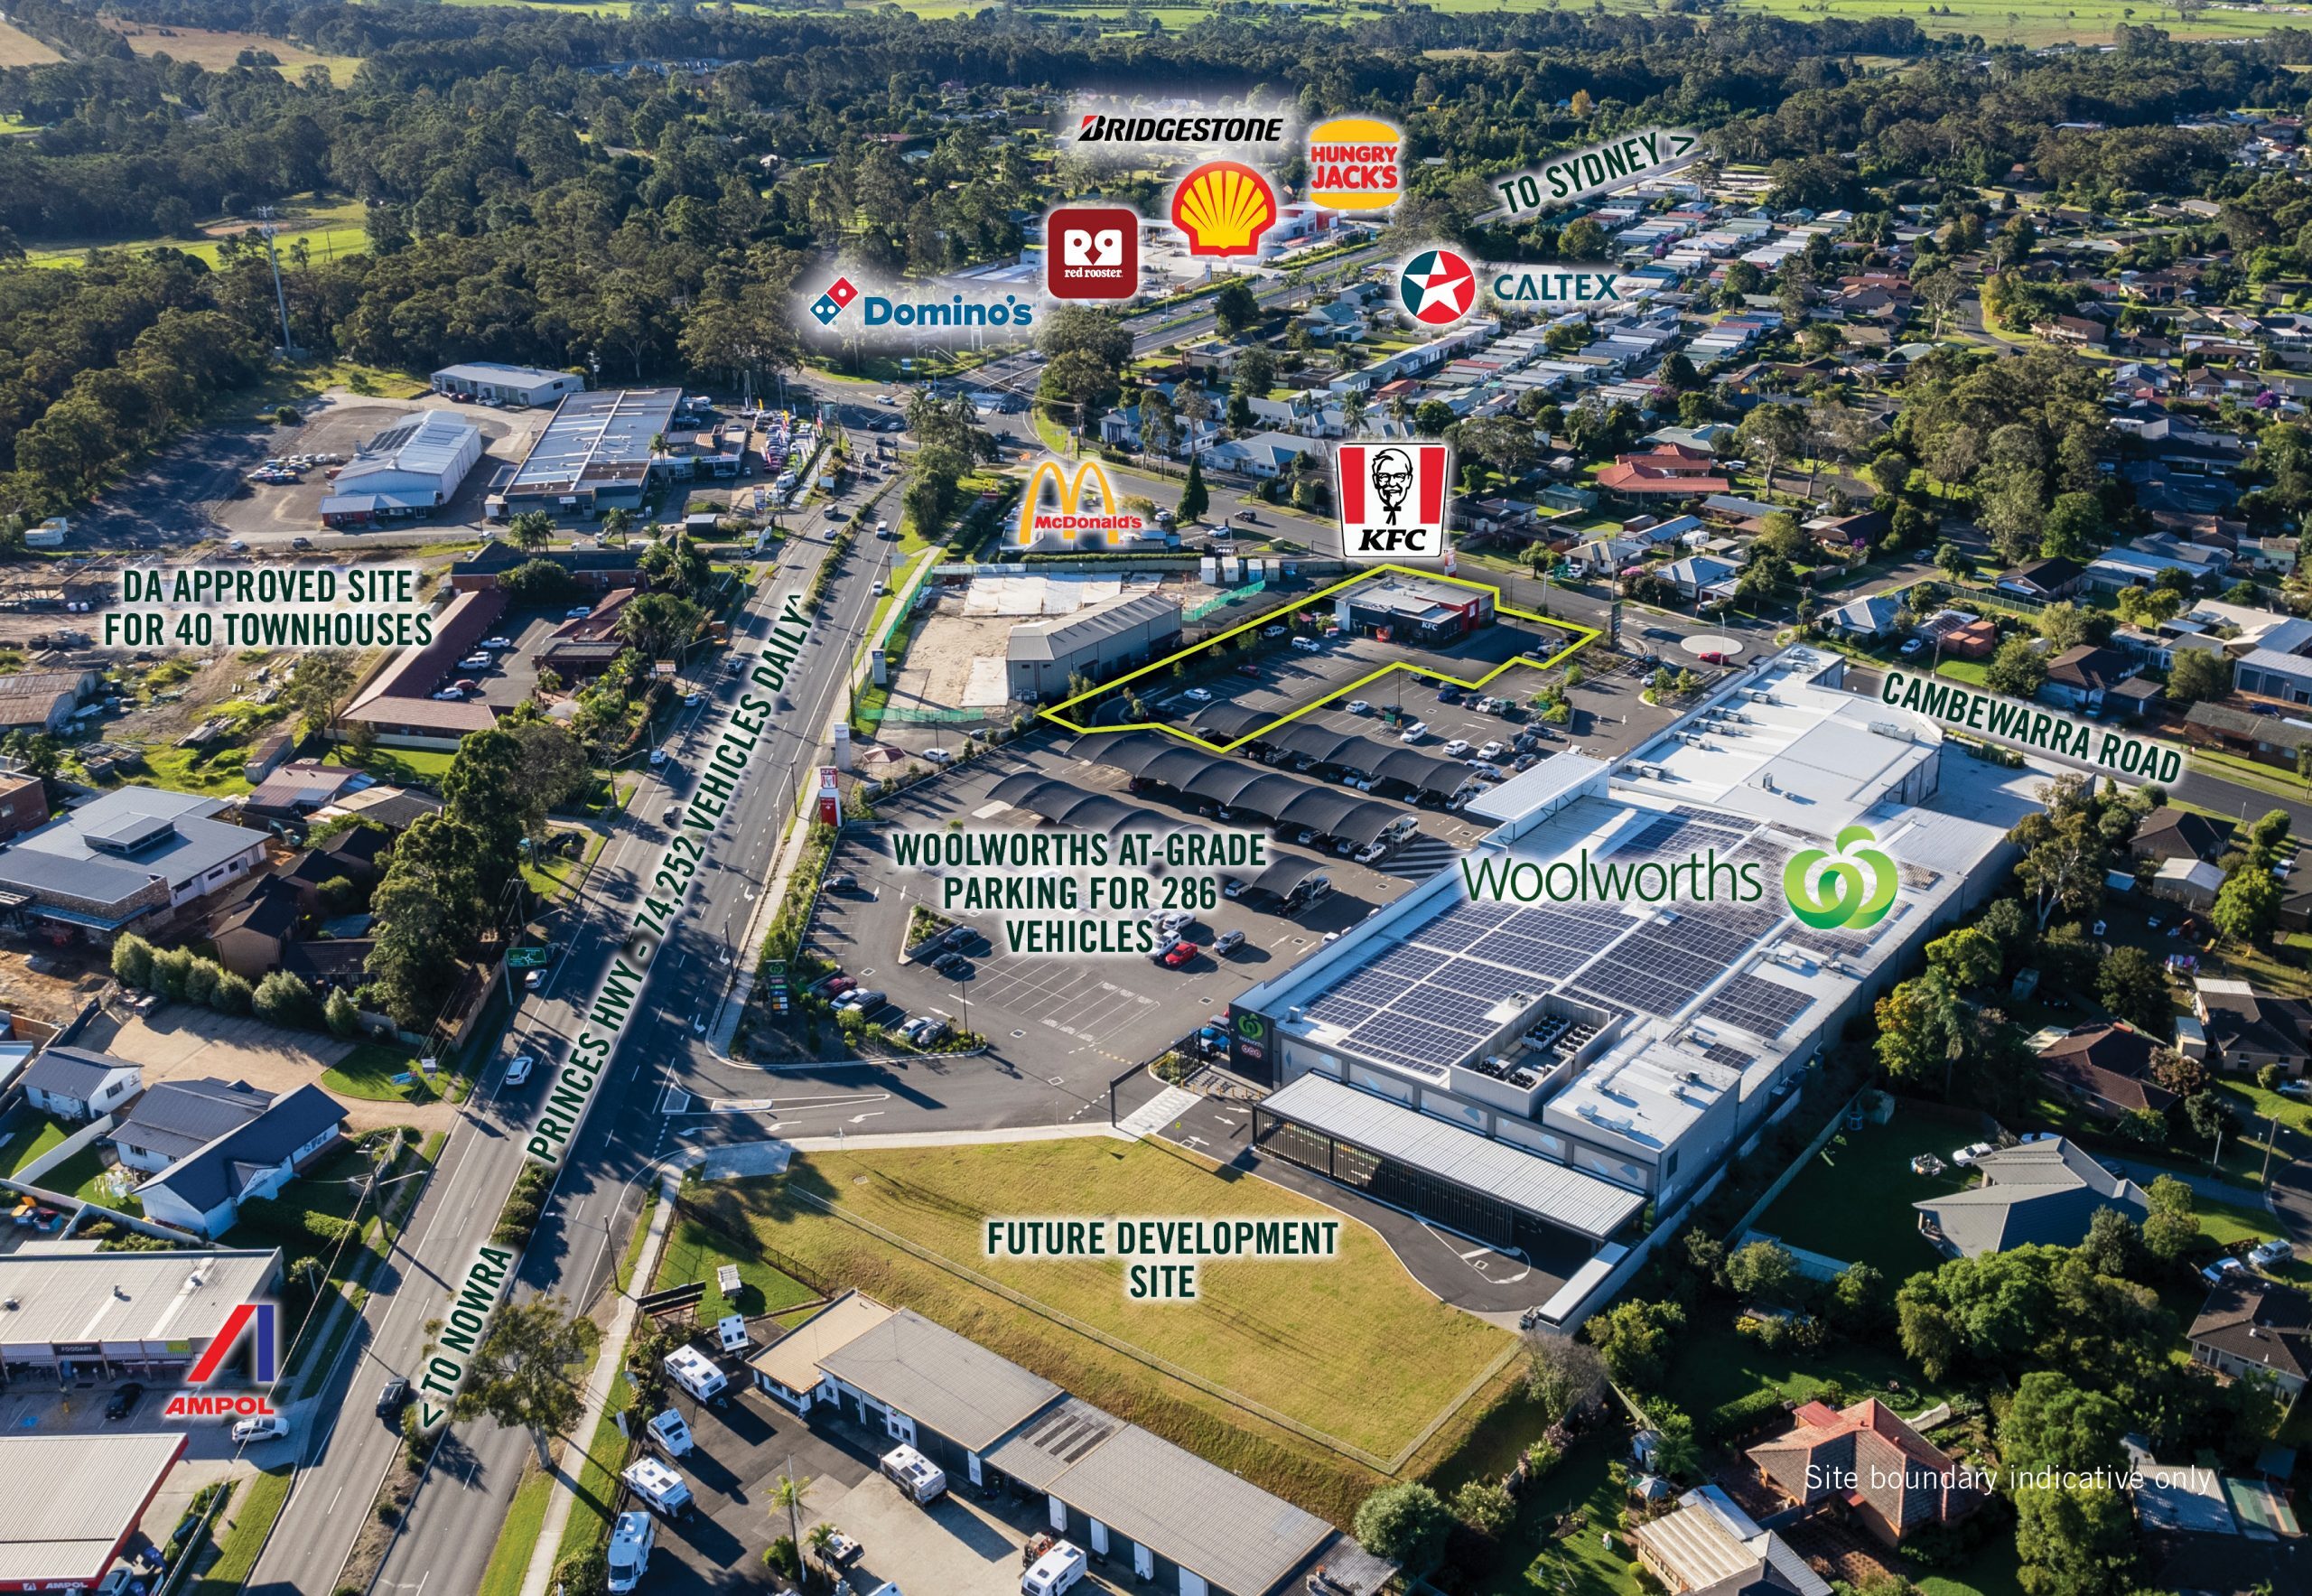 KFC Bomaderry position